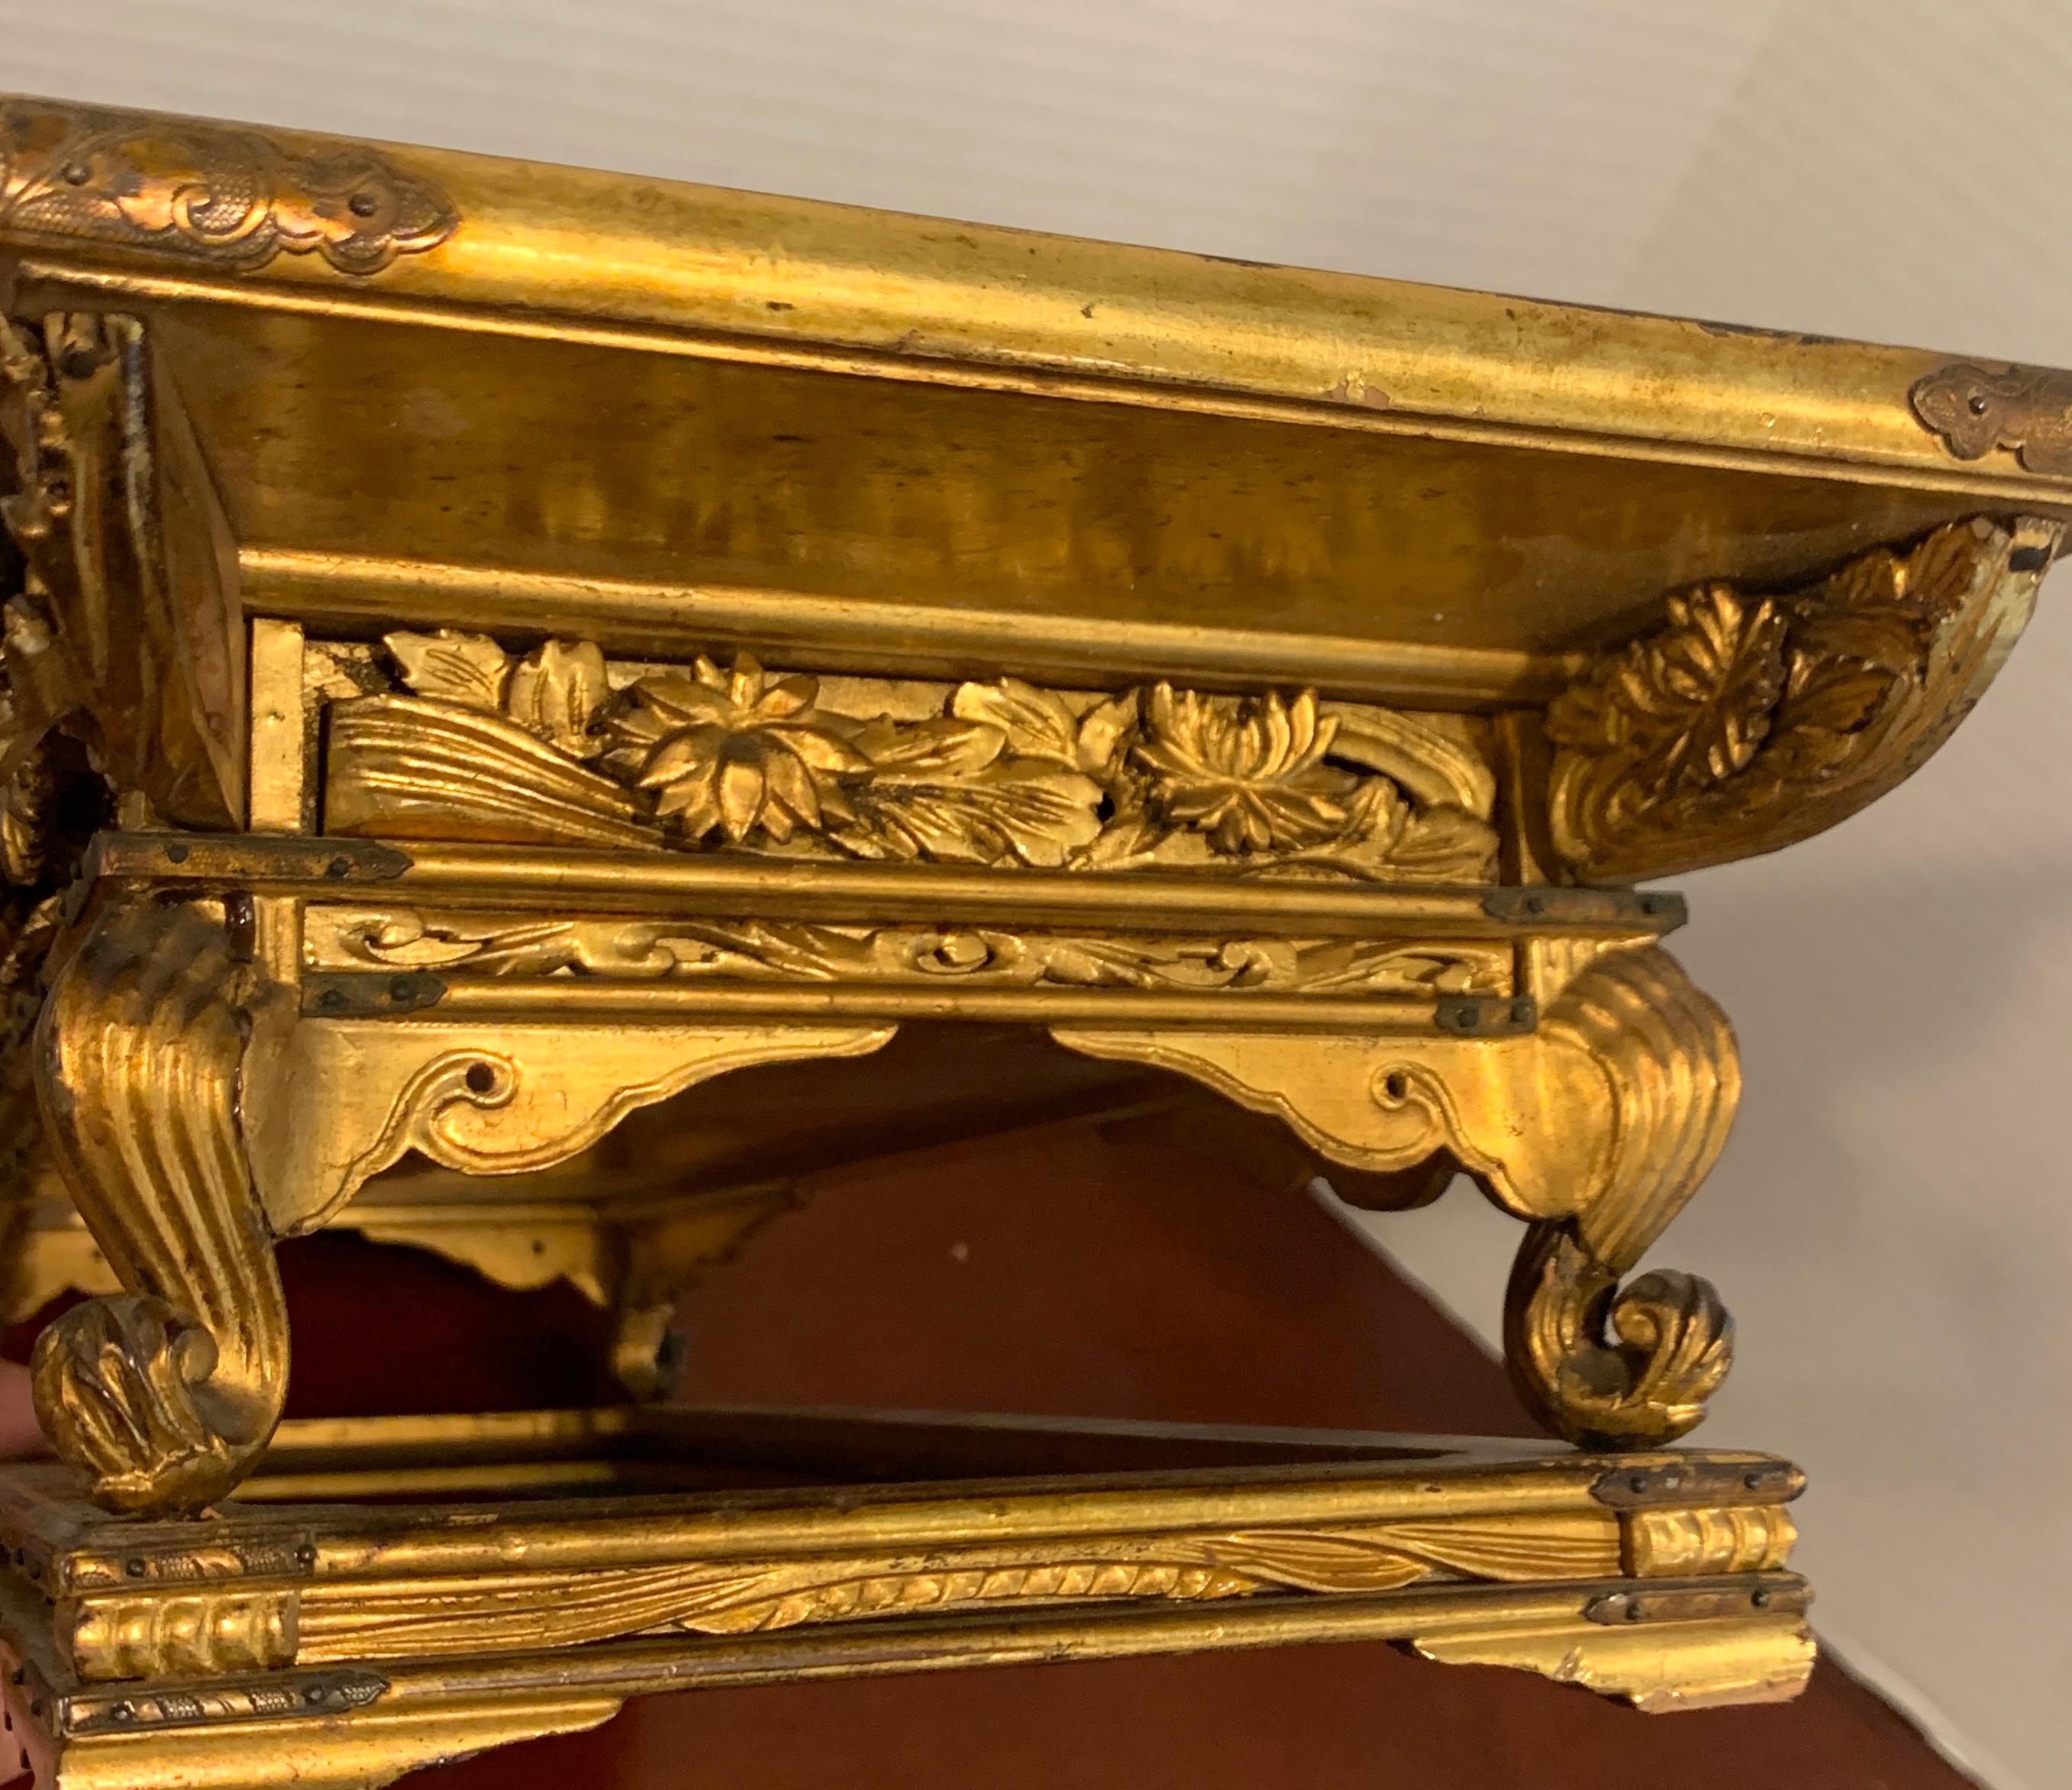 Exquisite Meiji Period Gilt Lacquered and Brass Mounted Stand For Sale 3